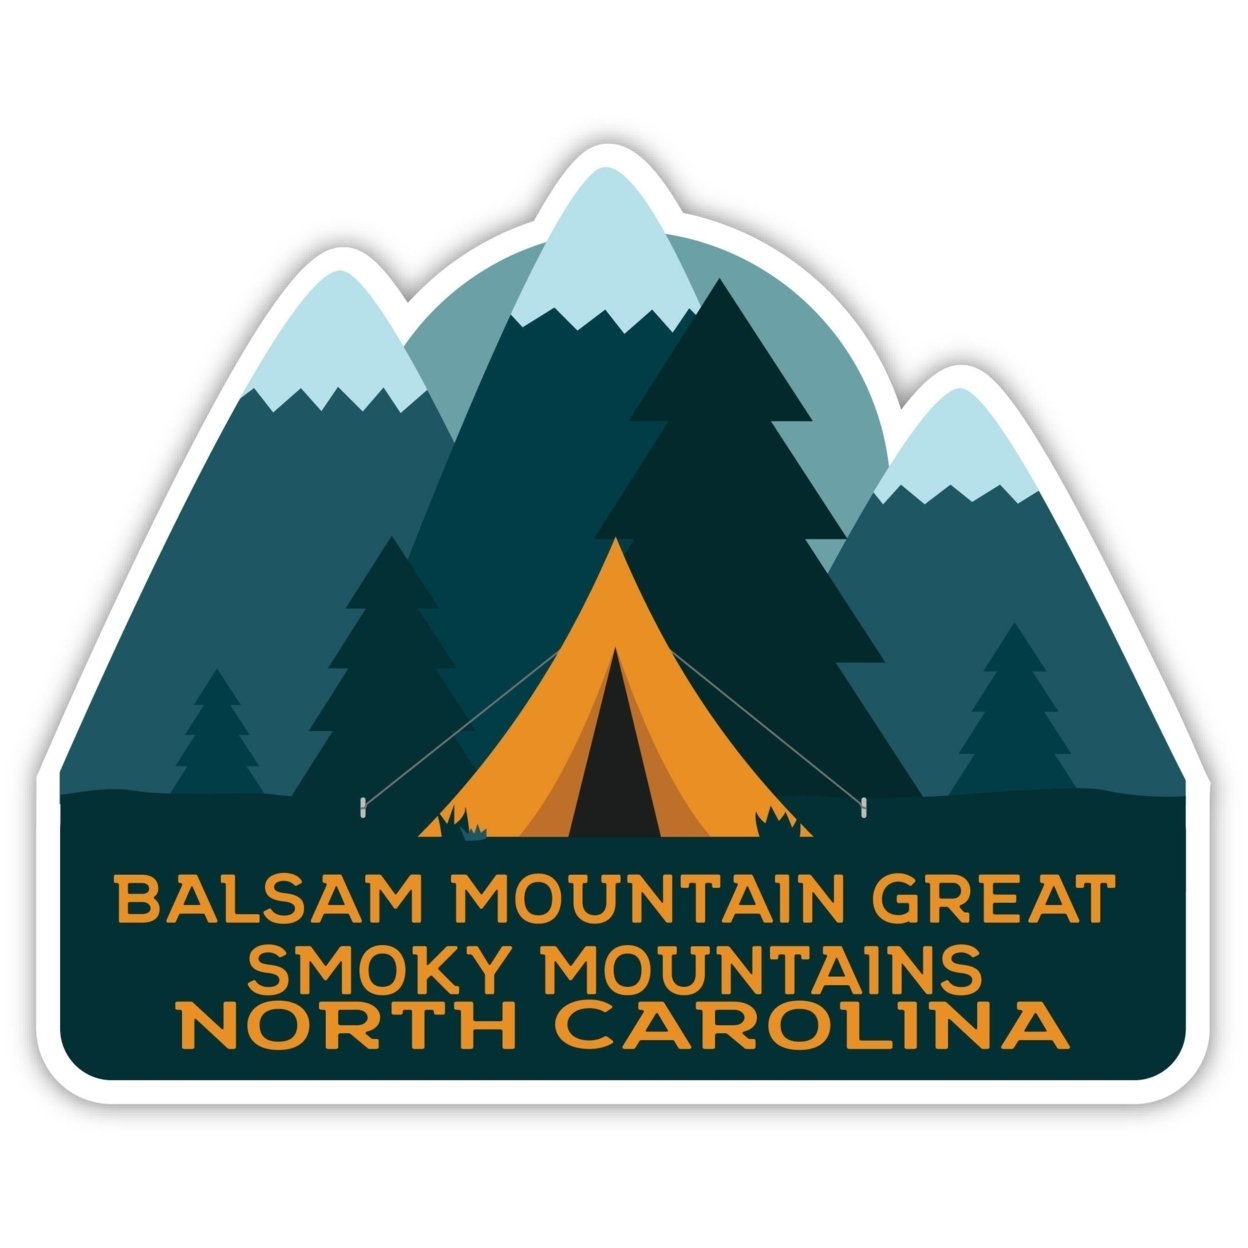 Balsam Mountain Great Smoky Mountains North Carolina Souvenir Decorative Stickers (Choose Theme And Size) - Single Unit, 10-Inch, Tent